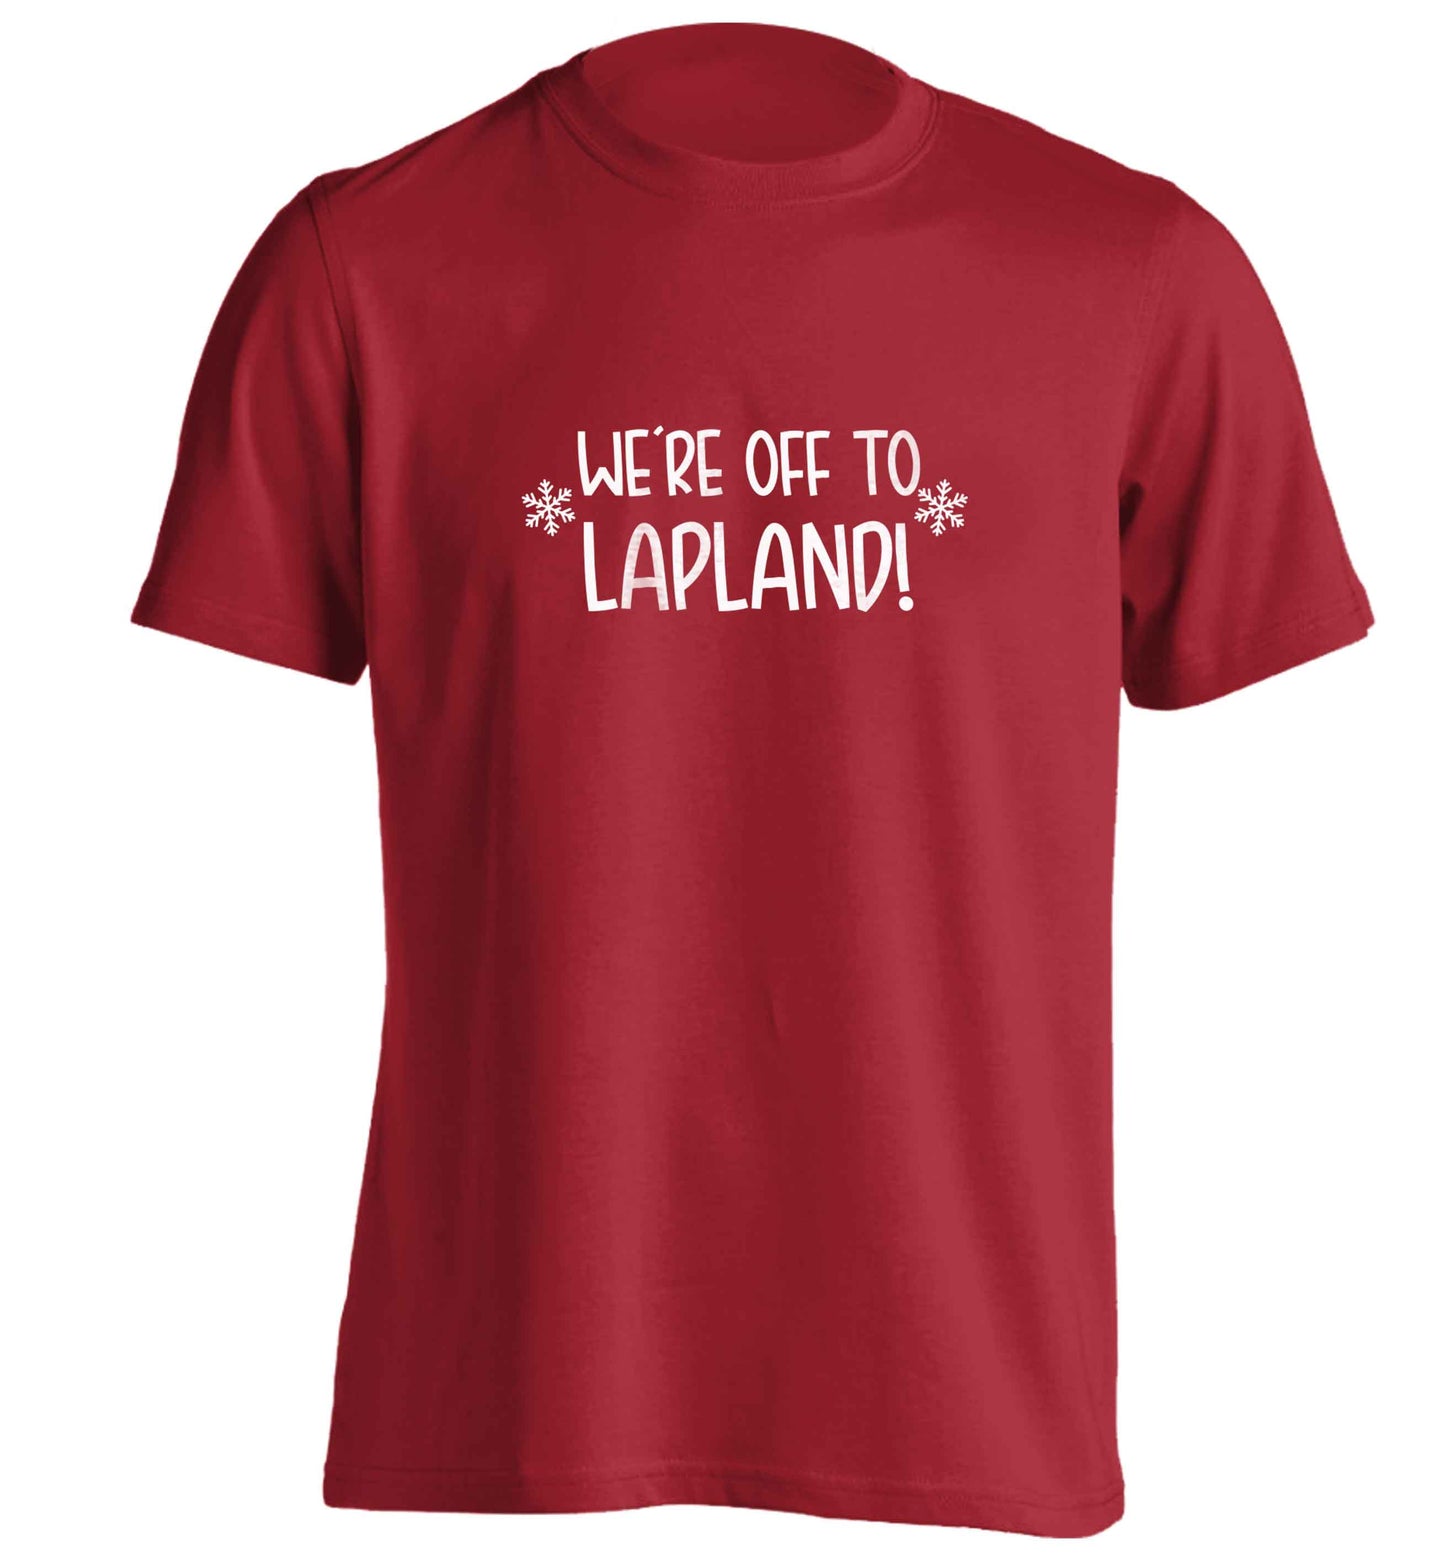 We're off to Lapland adults unisex red Tshirt 2XL